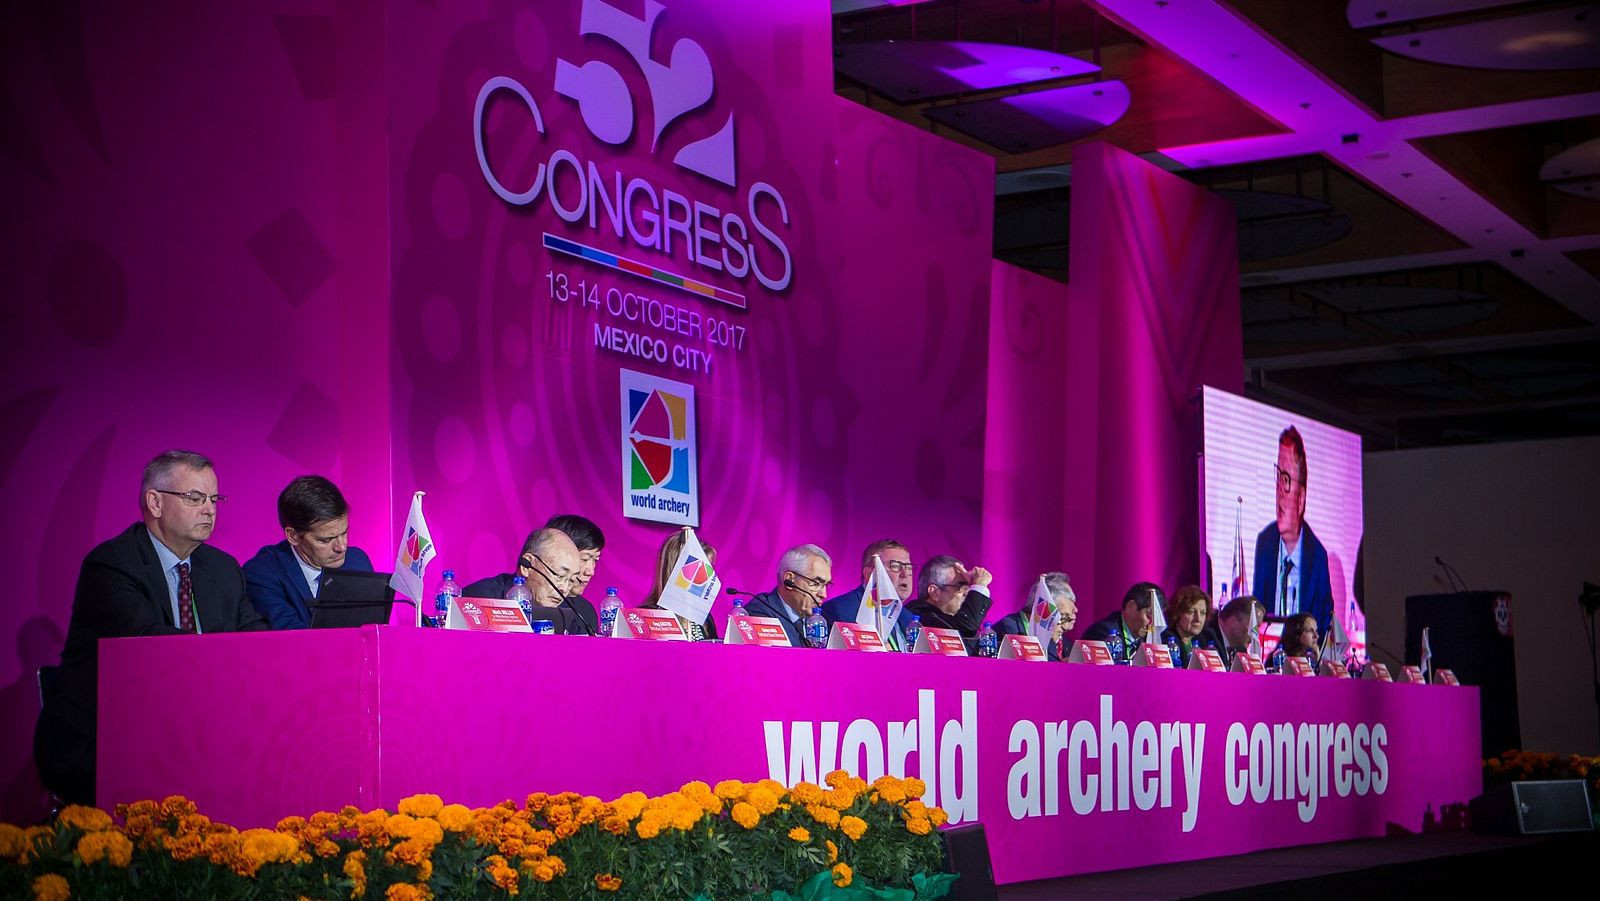 Three members excluded for non-payment of fees at World Archery Congress